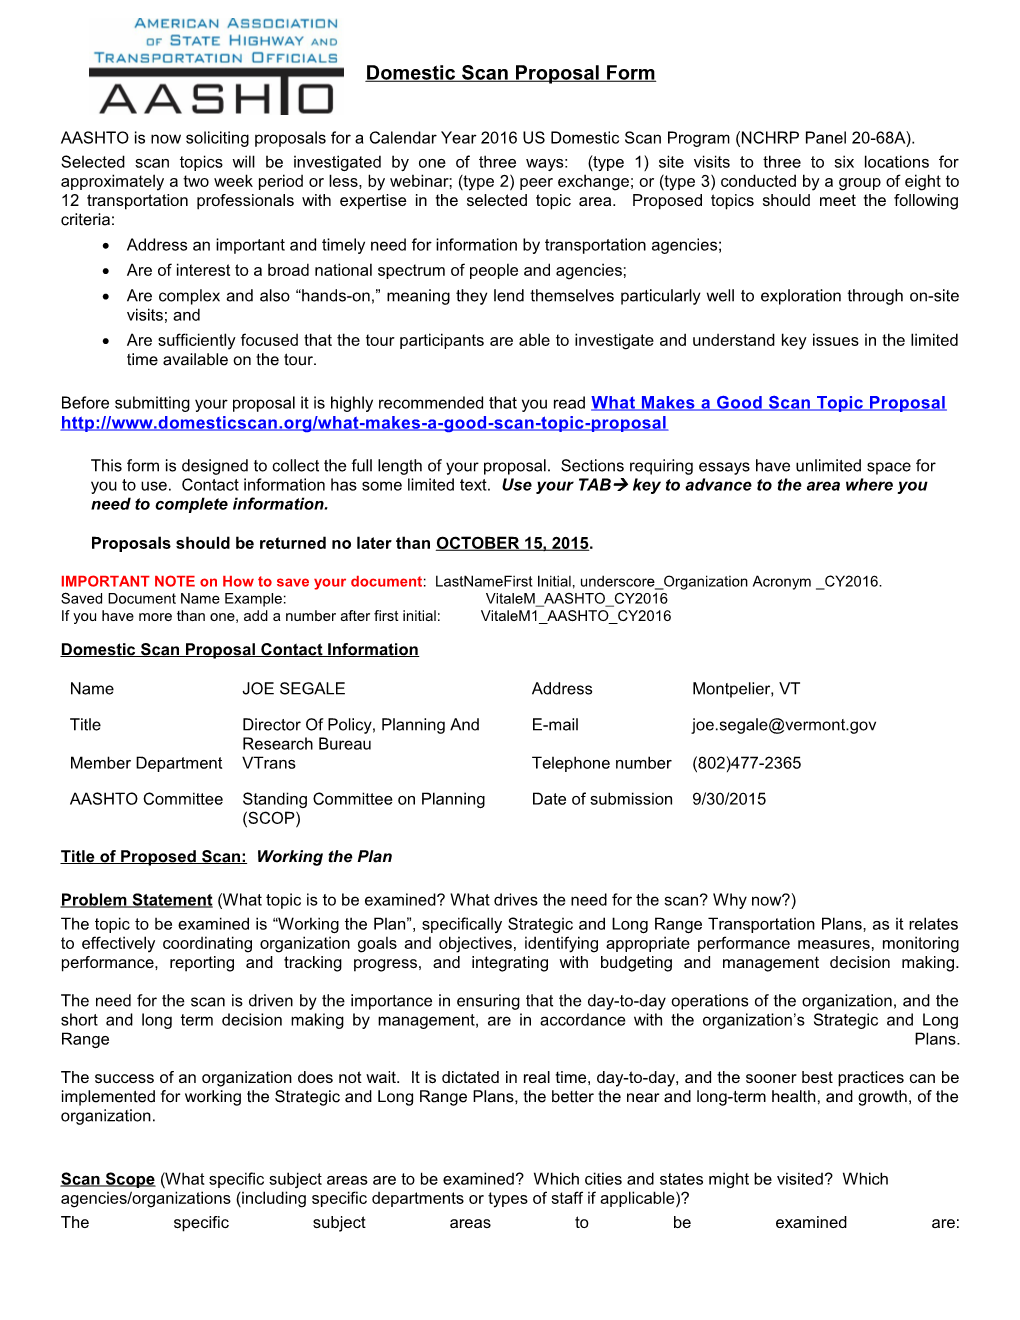 AASHTO Domestic Scan Proposal Form s5